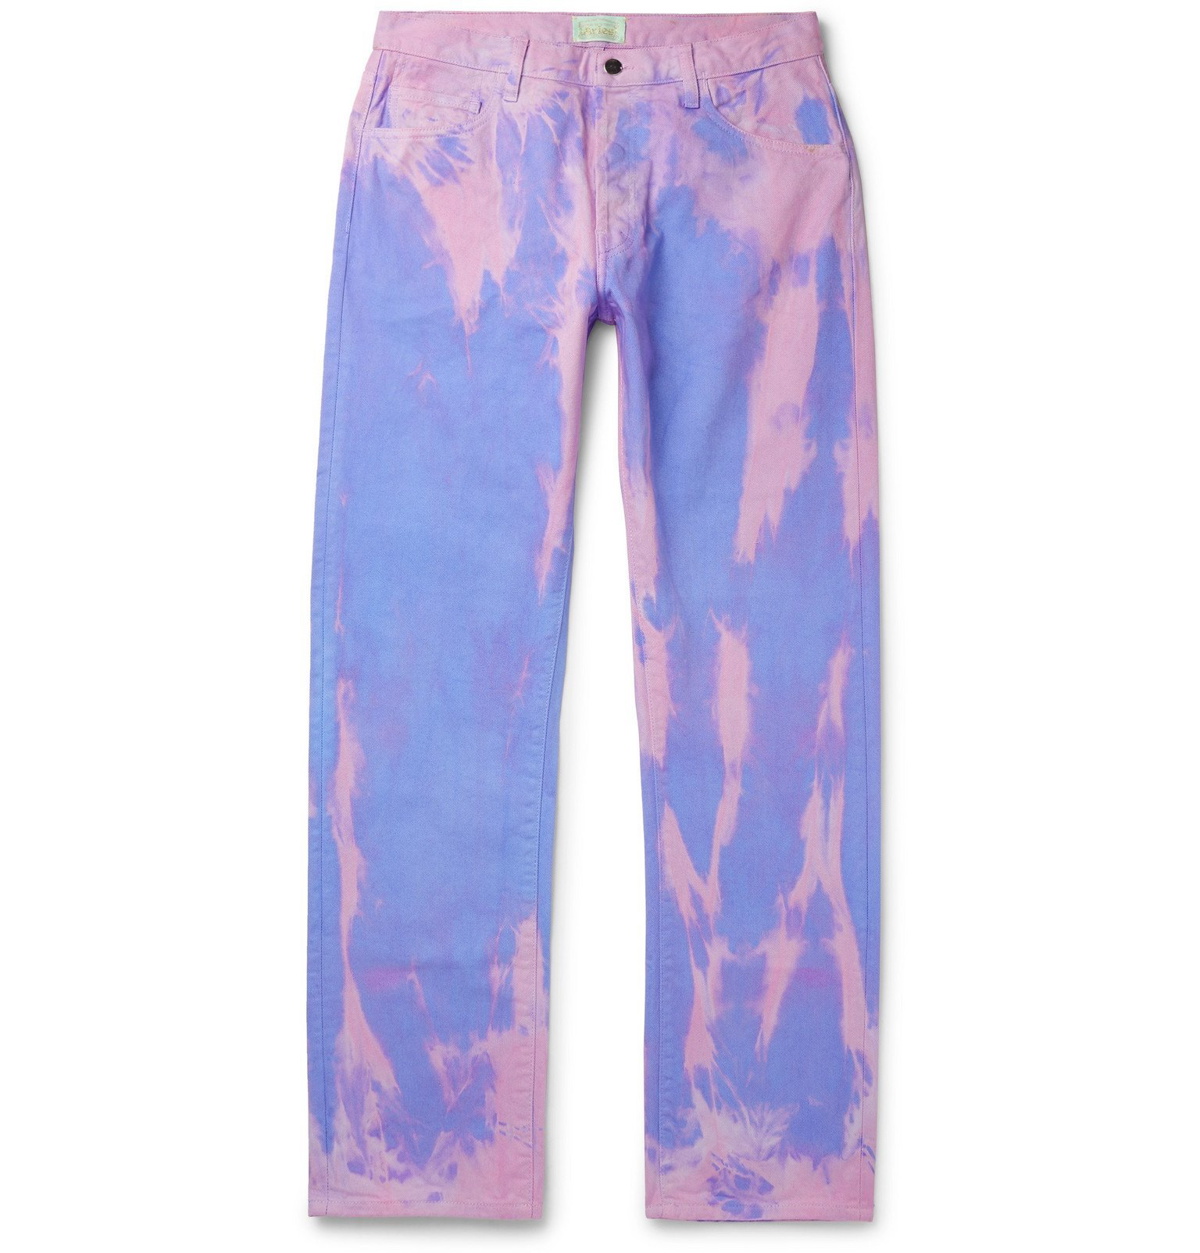 Aries Lilly Tie-Dyed Denim Jeans - Pink